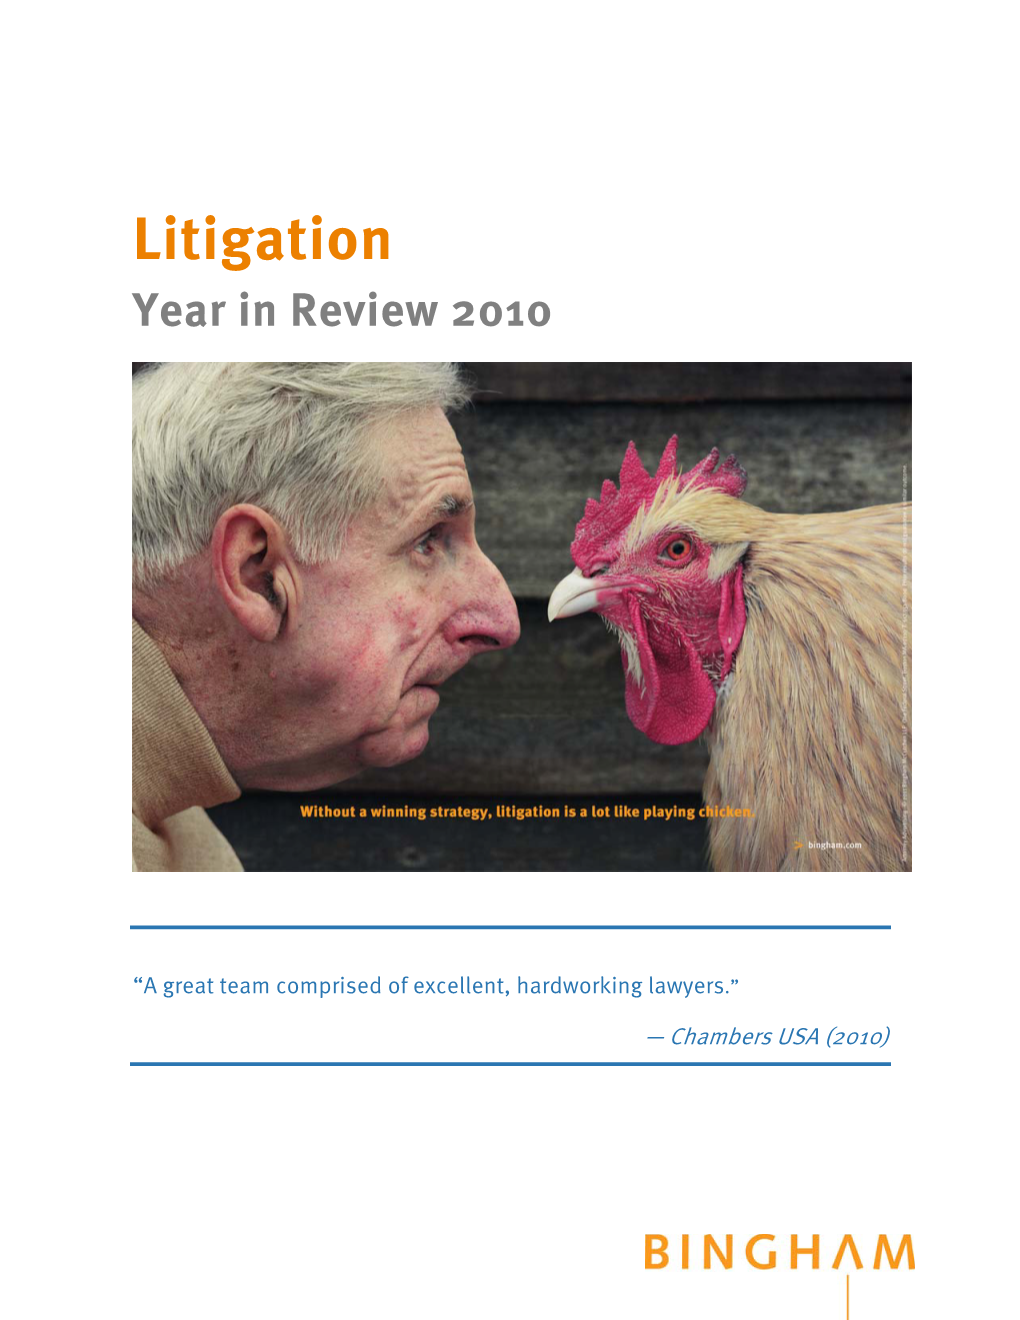 Litigation Year in Review 2010